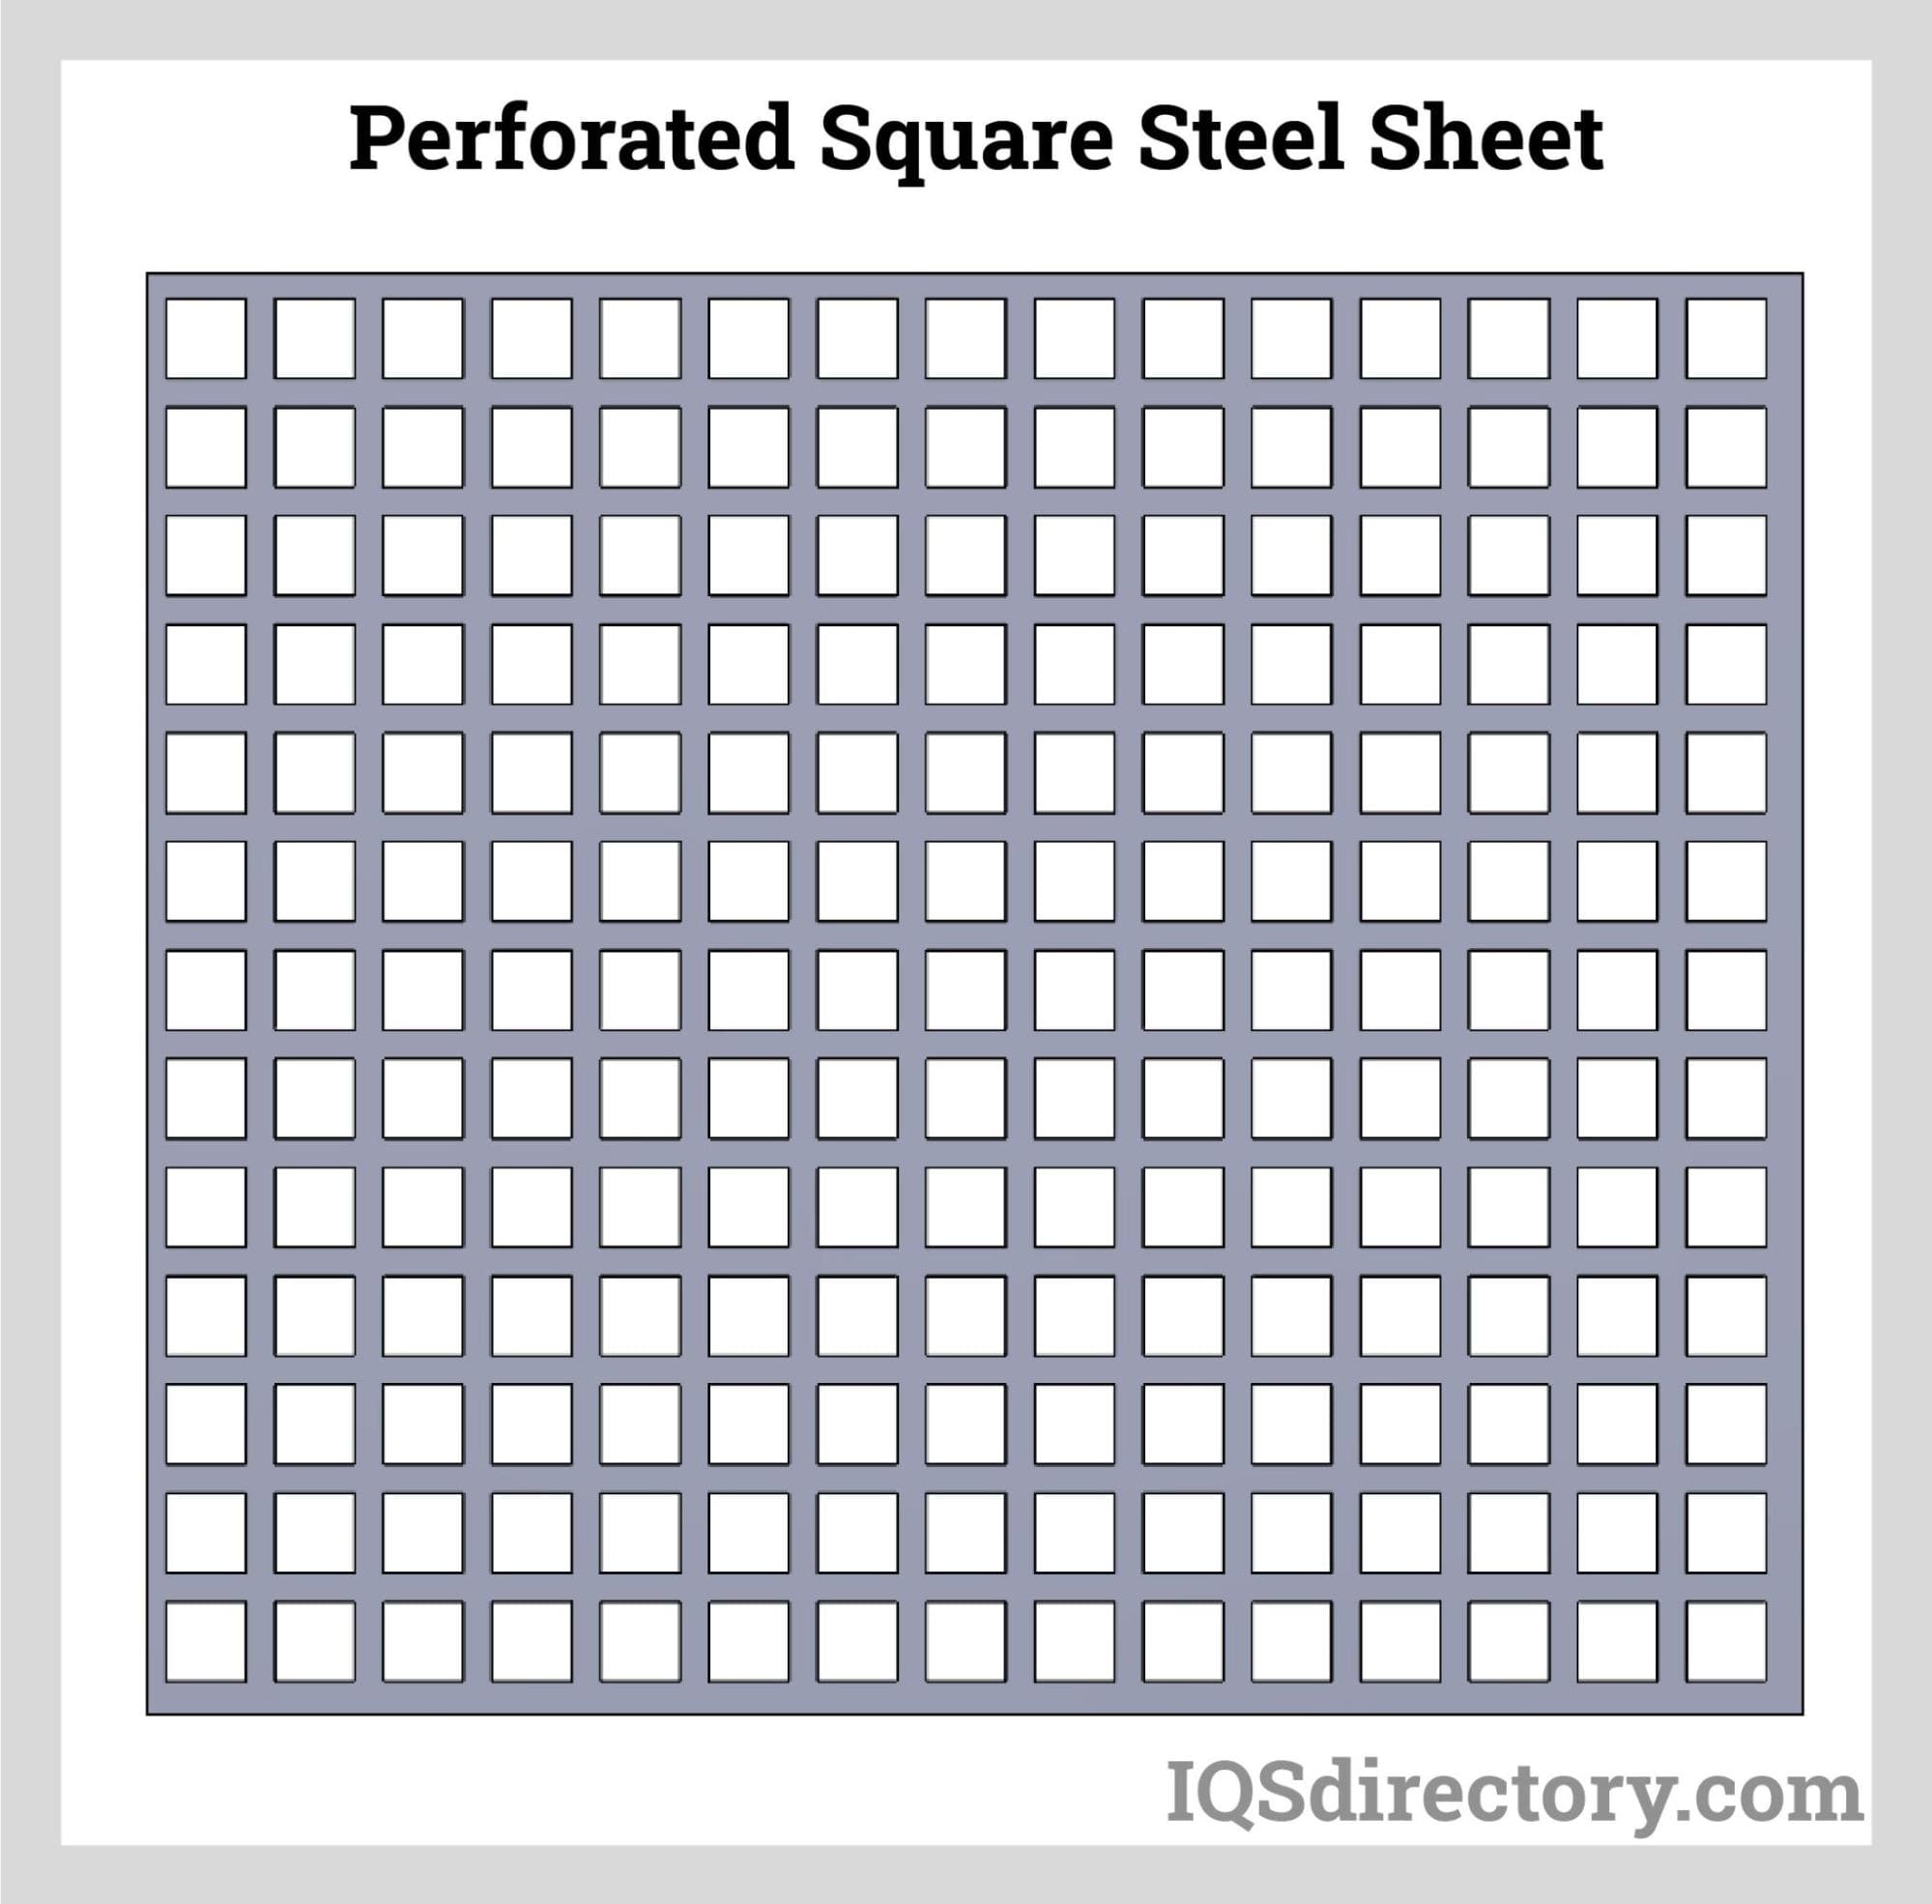 Perforated Square Steel Sheet